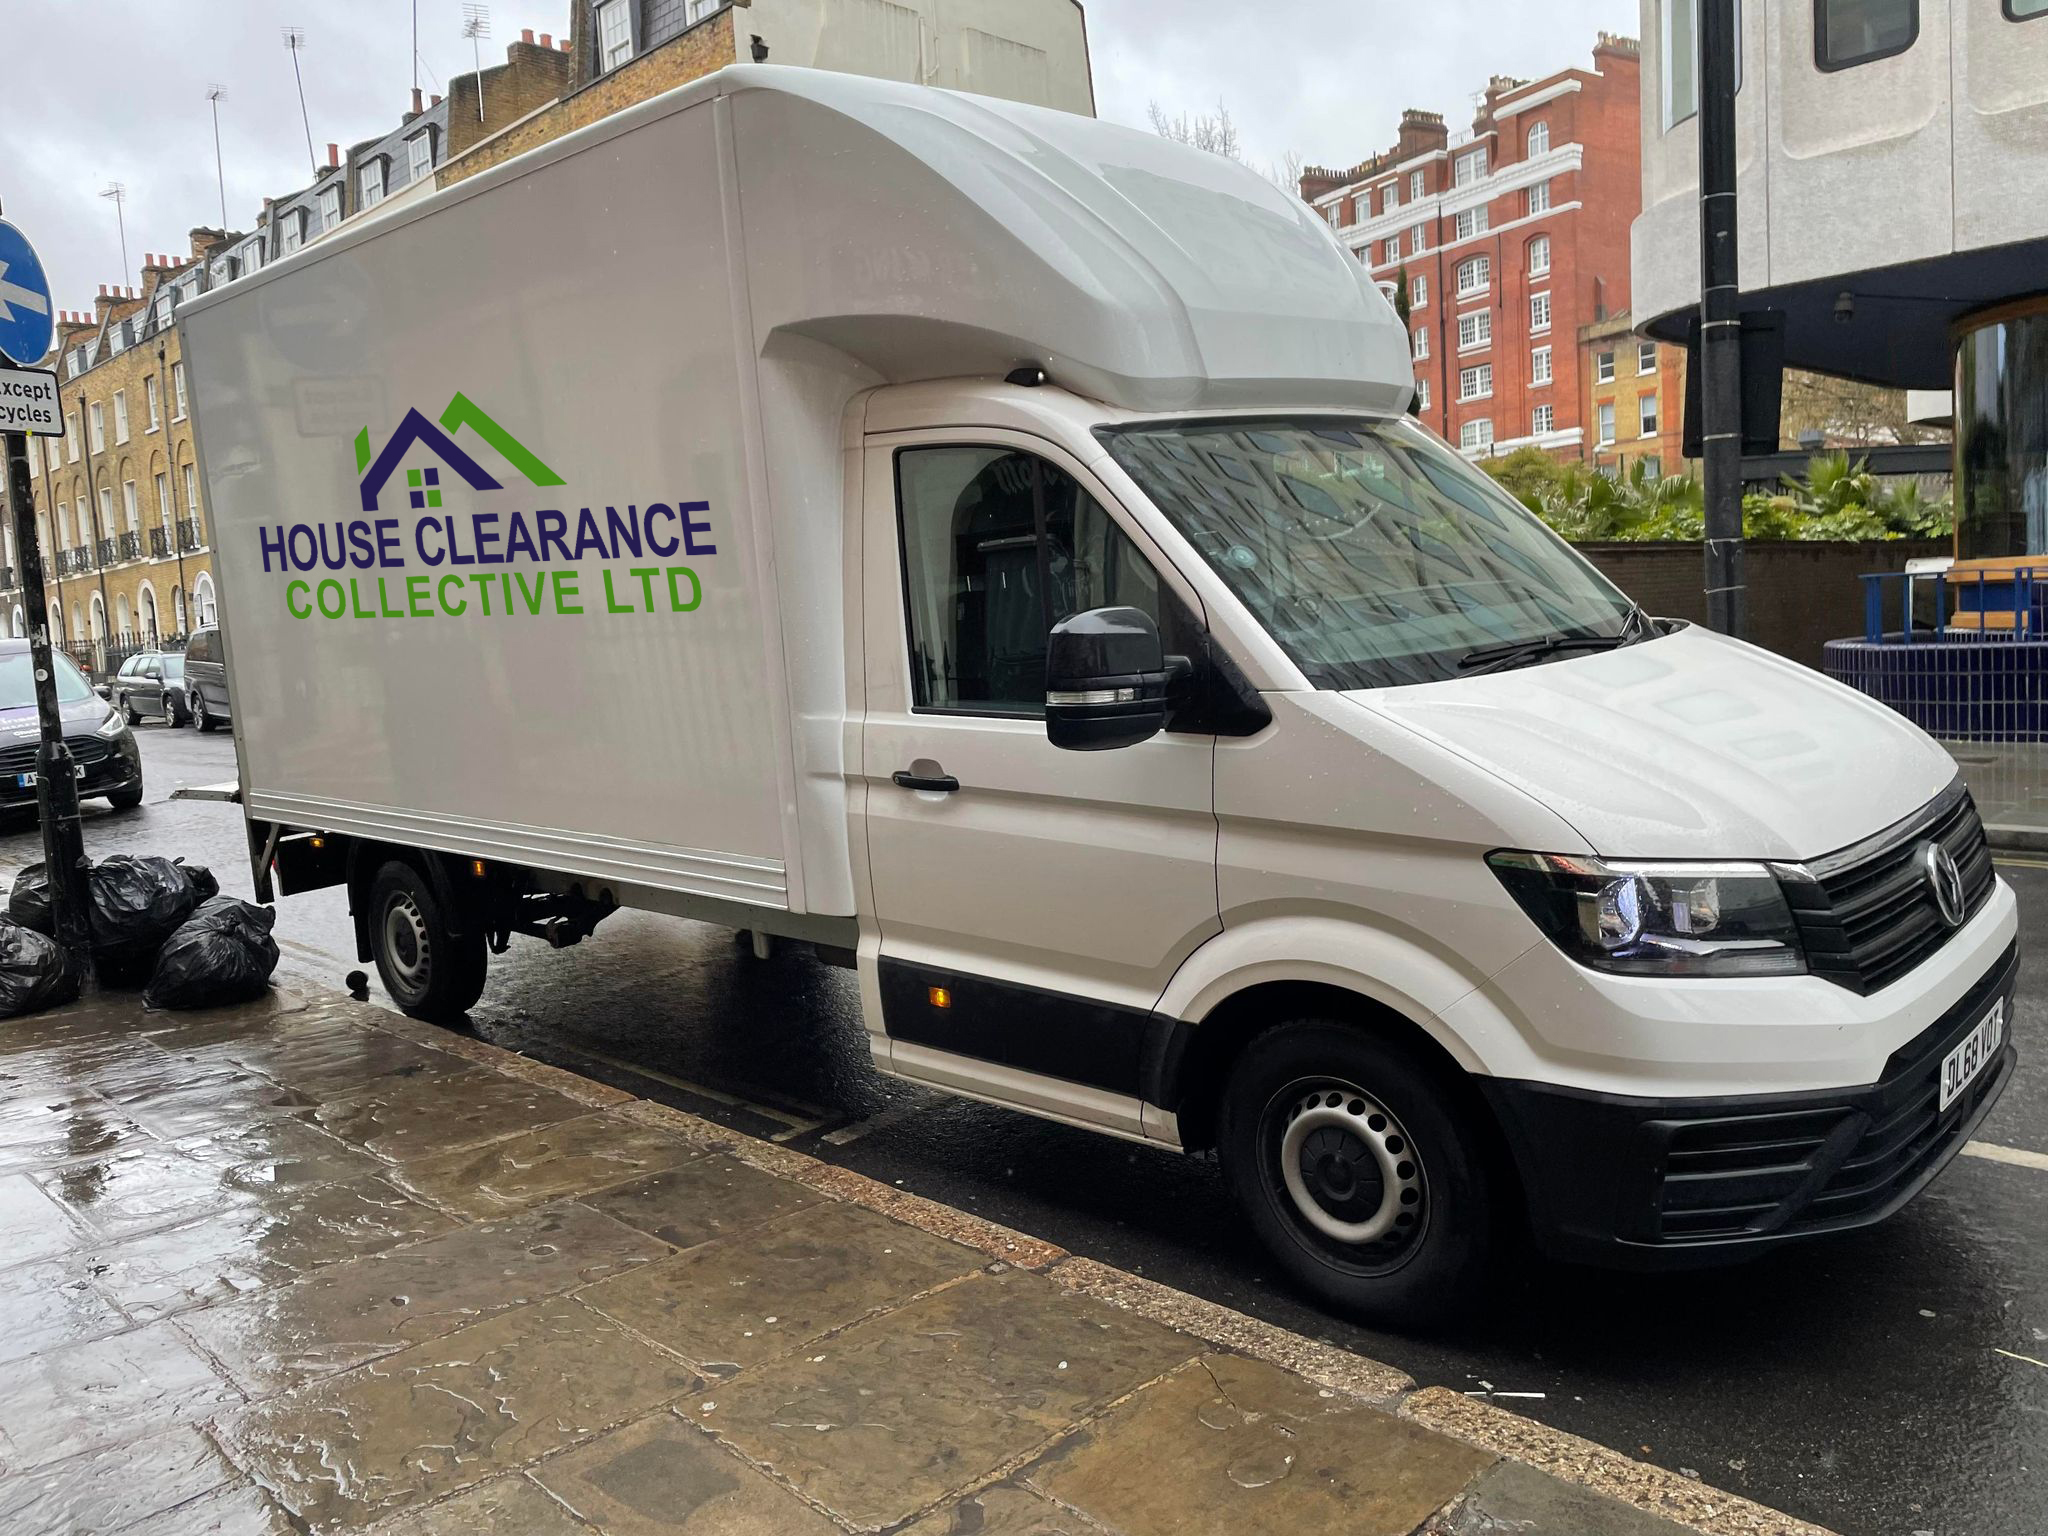 House clearance collective van